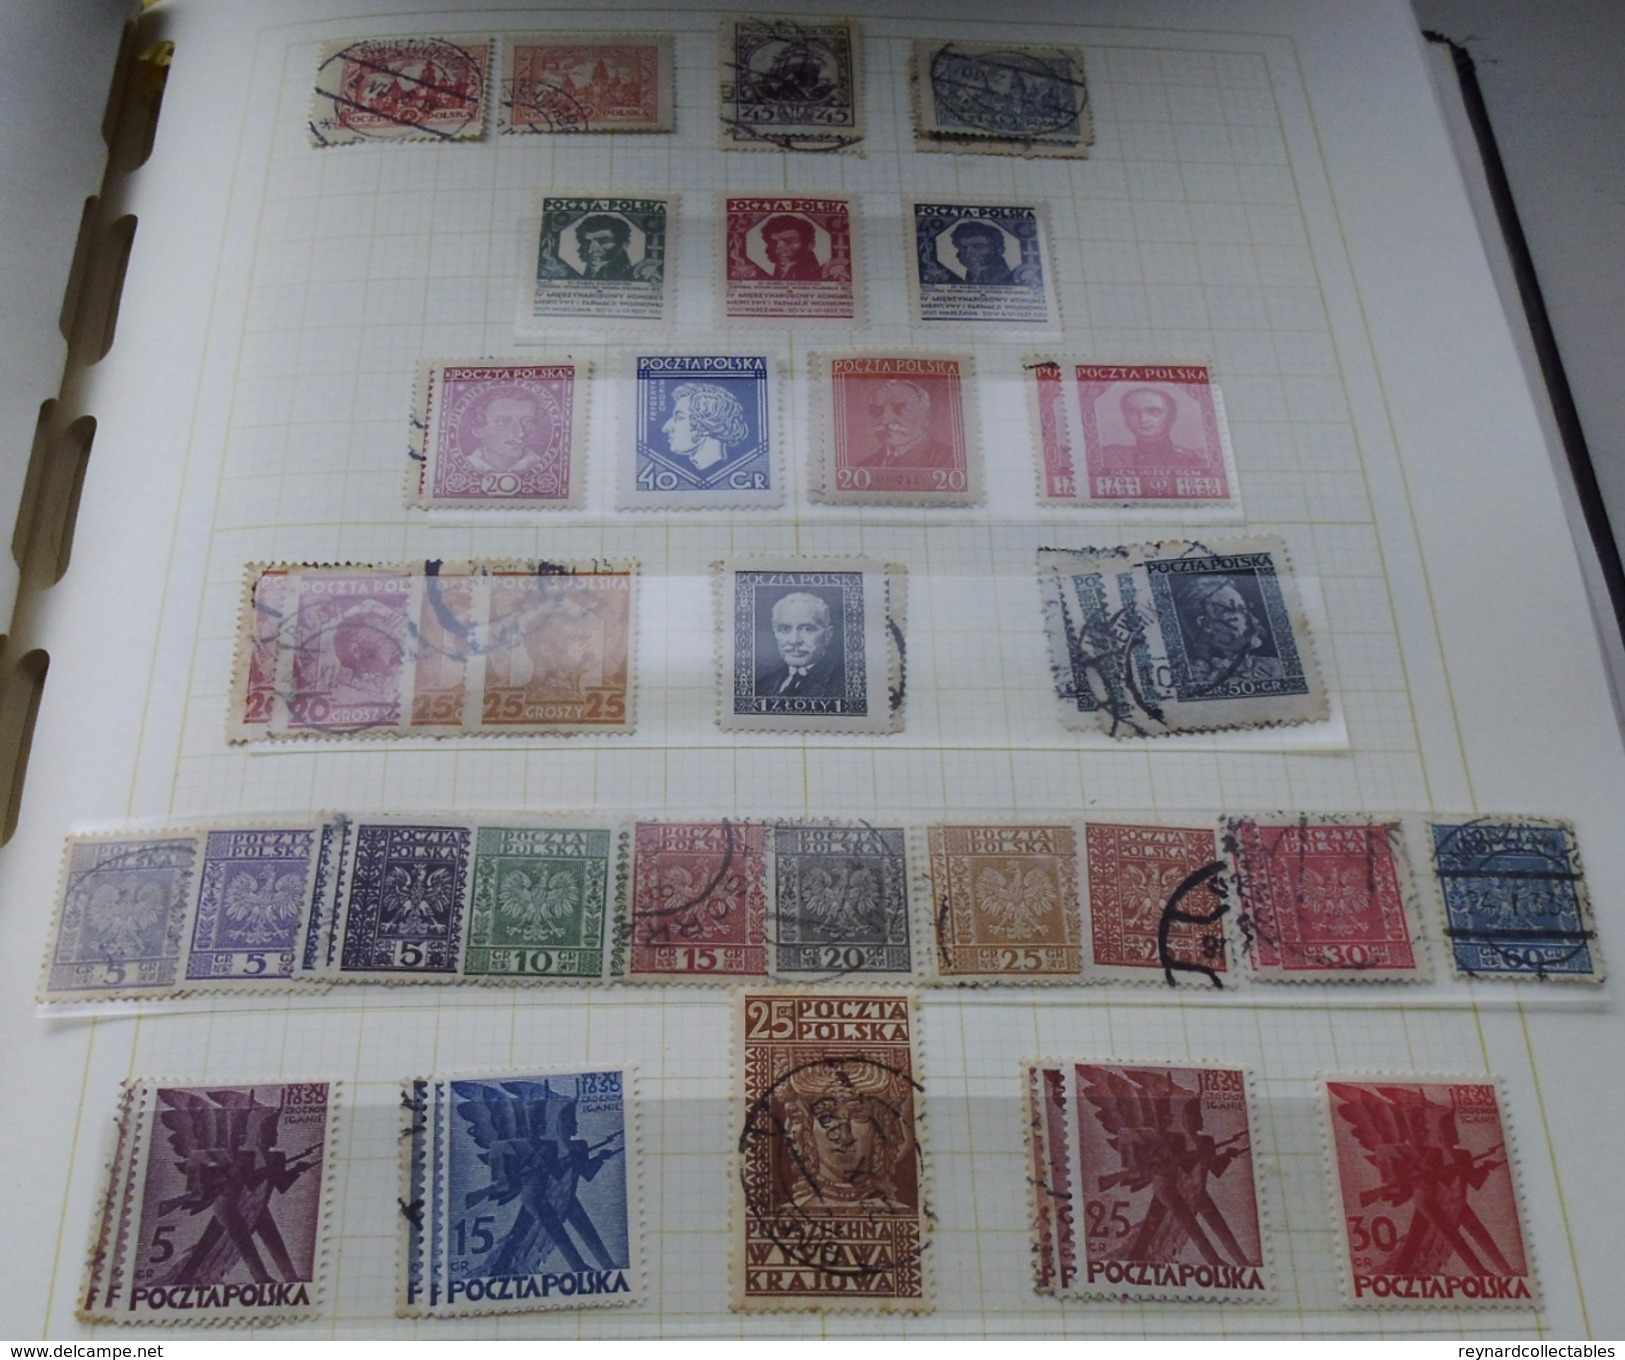 Superb Poland colln in Schaubek 1915-1950s,+ hagners,covers. 1930s m/sheets, mint/used. Danzig etc